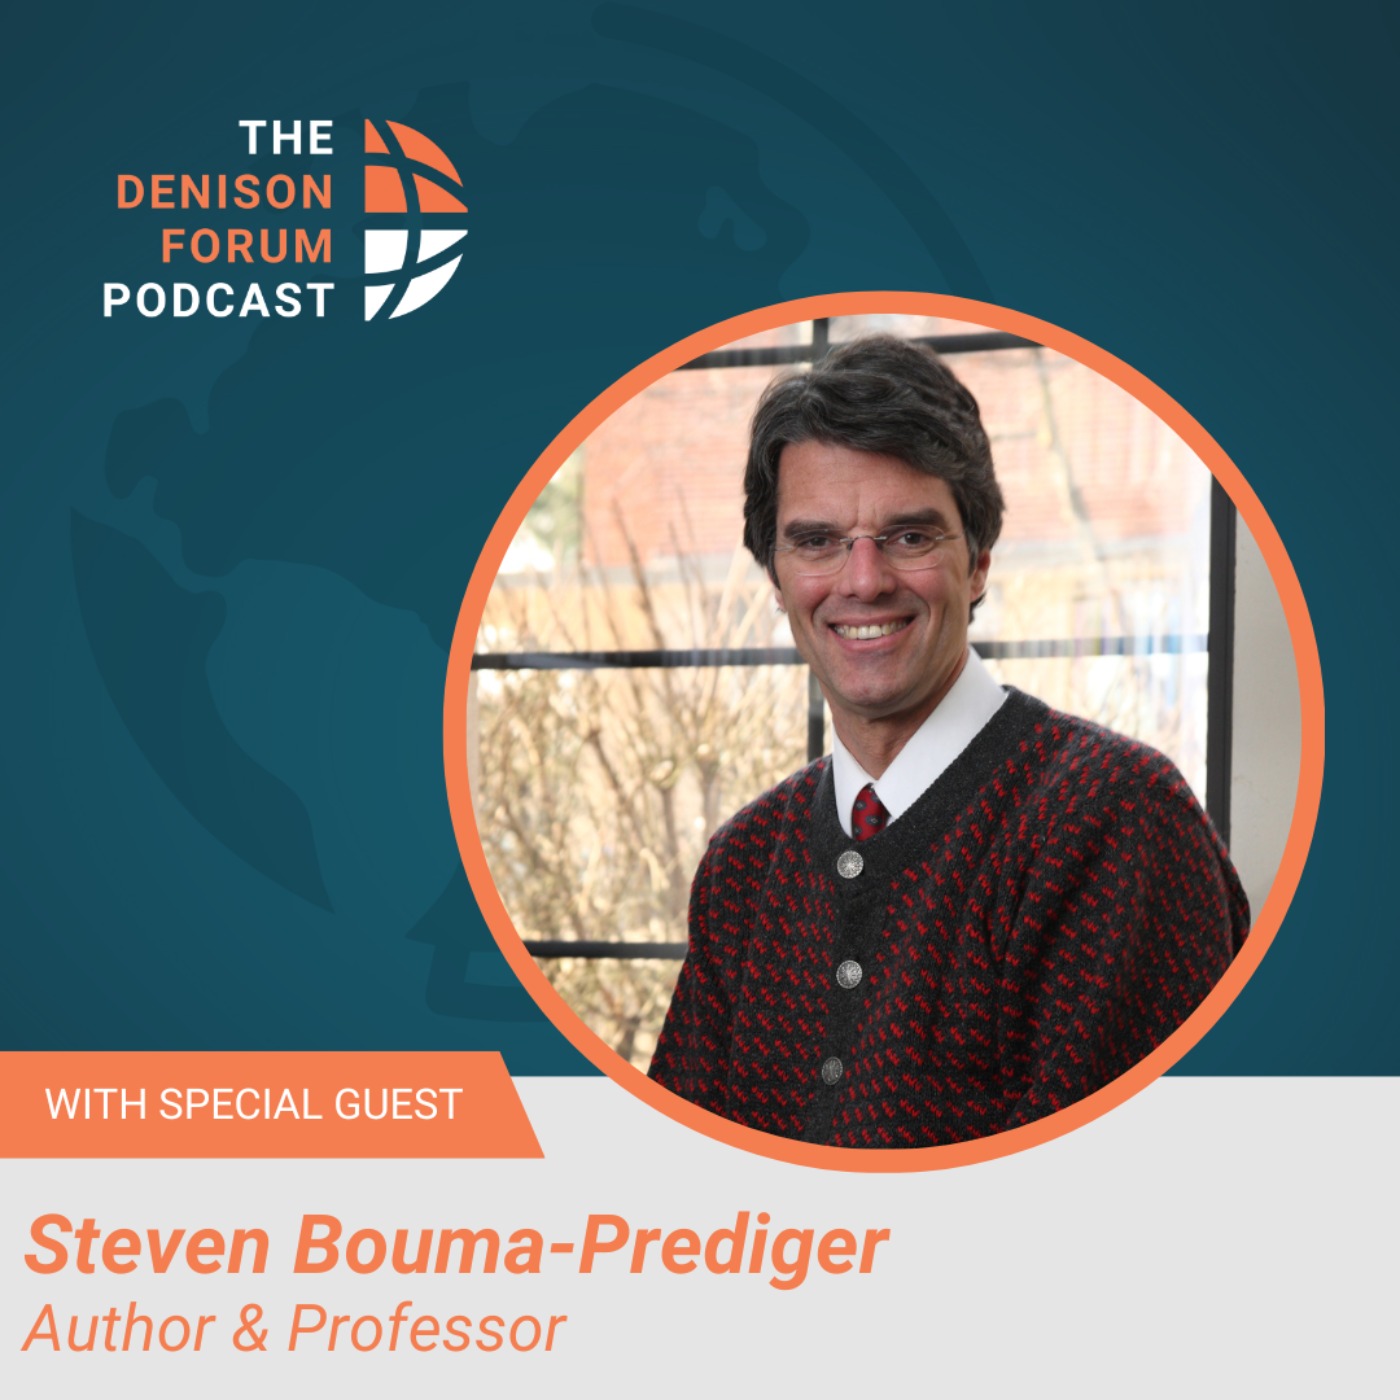 The essential Christian practice of creation care discipleship with Steven Bouma-Prediger